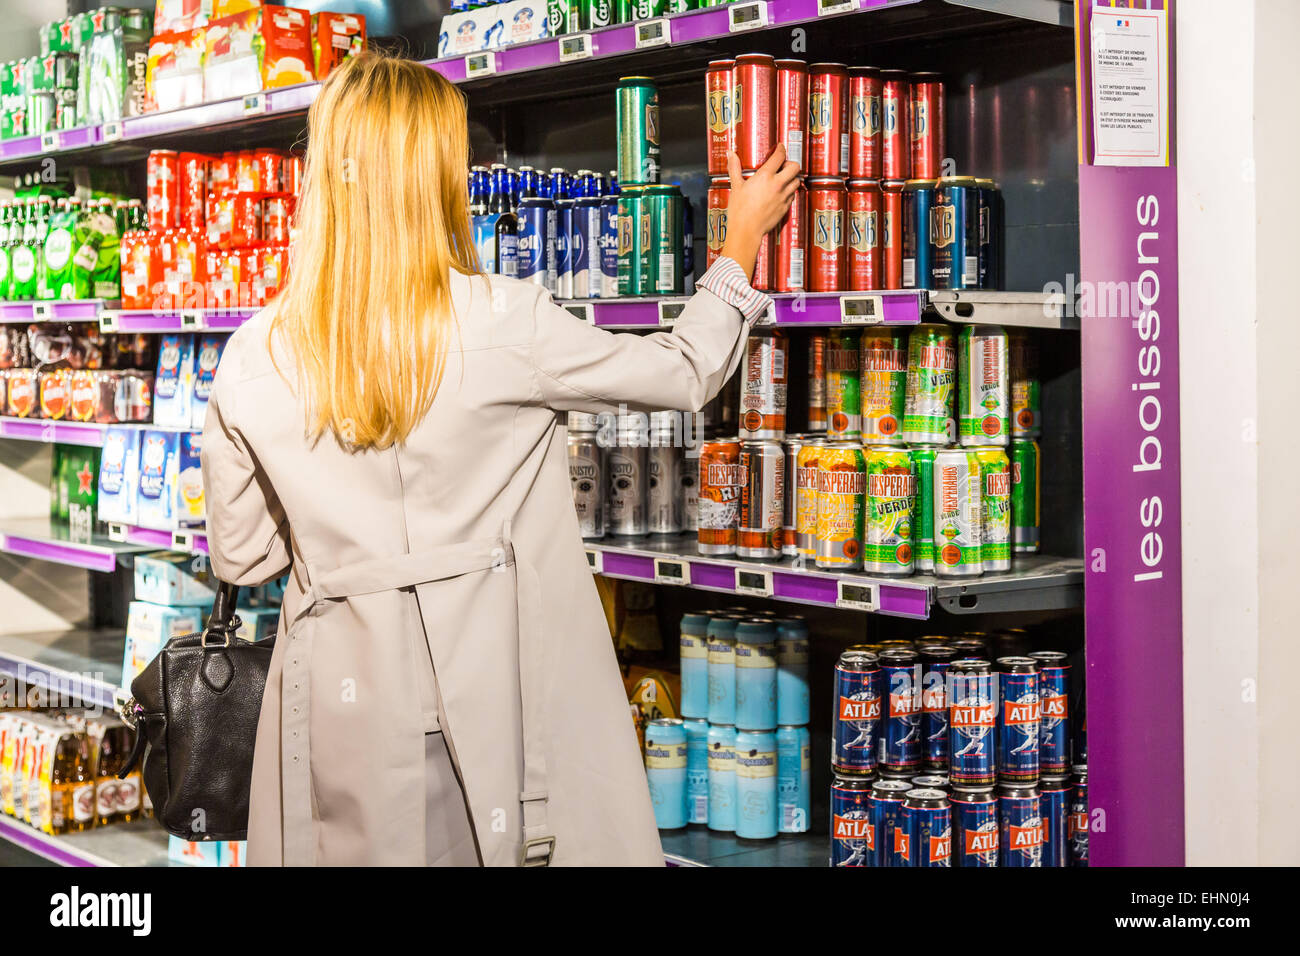 Woman in a supermarket. Liquors section. Stock Photo